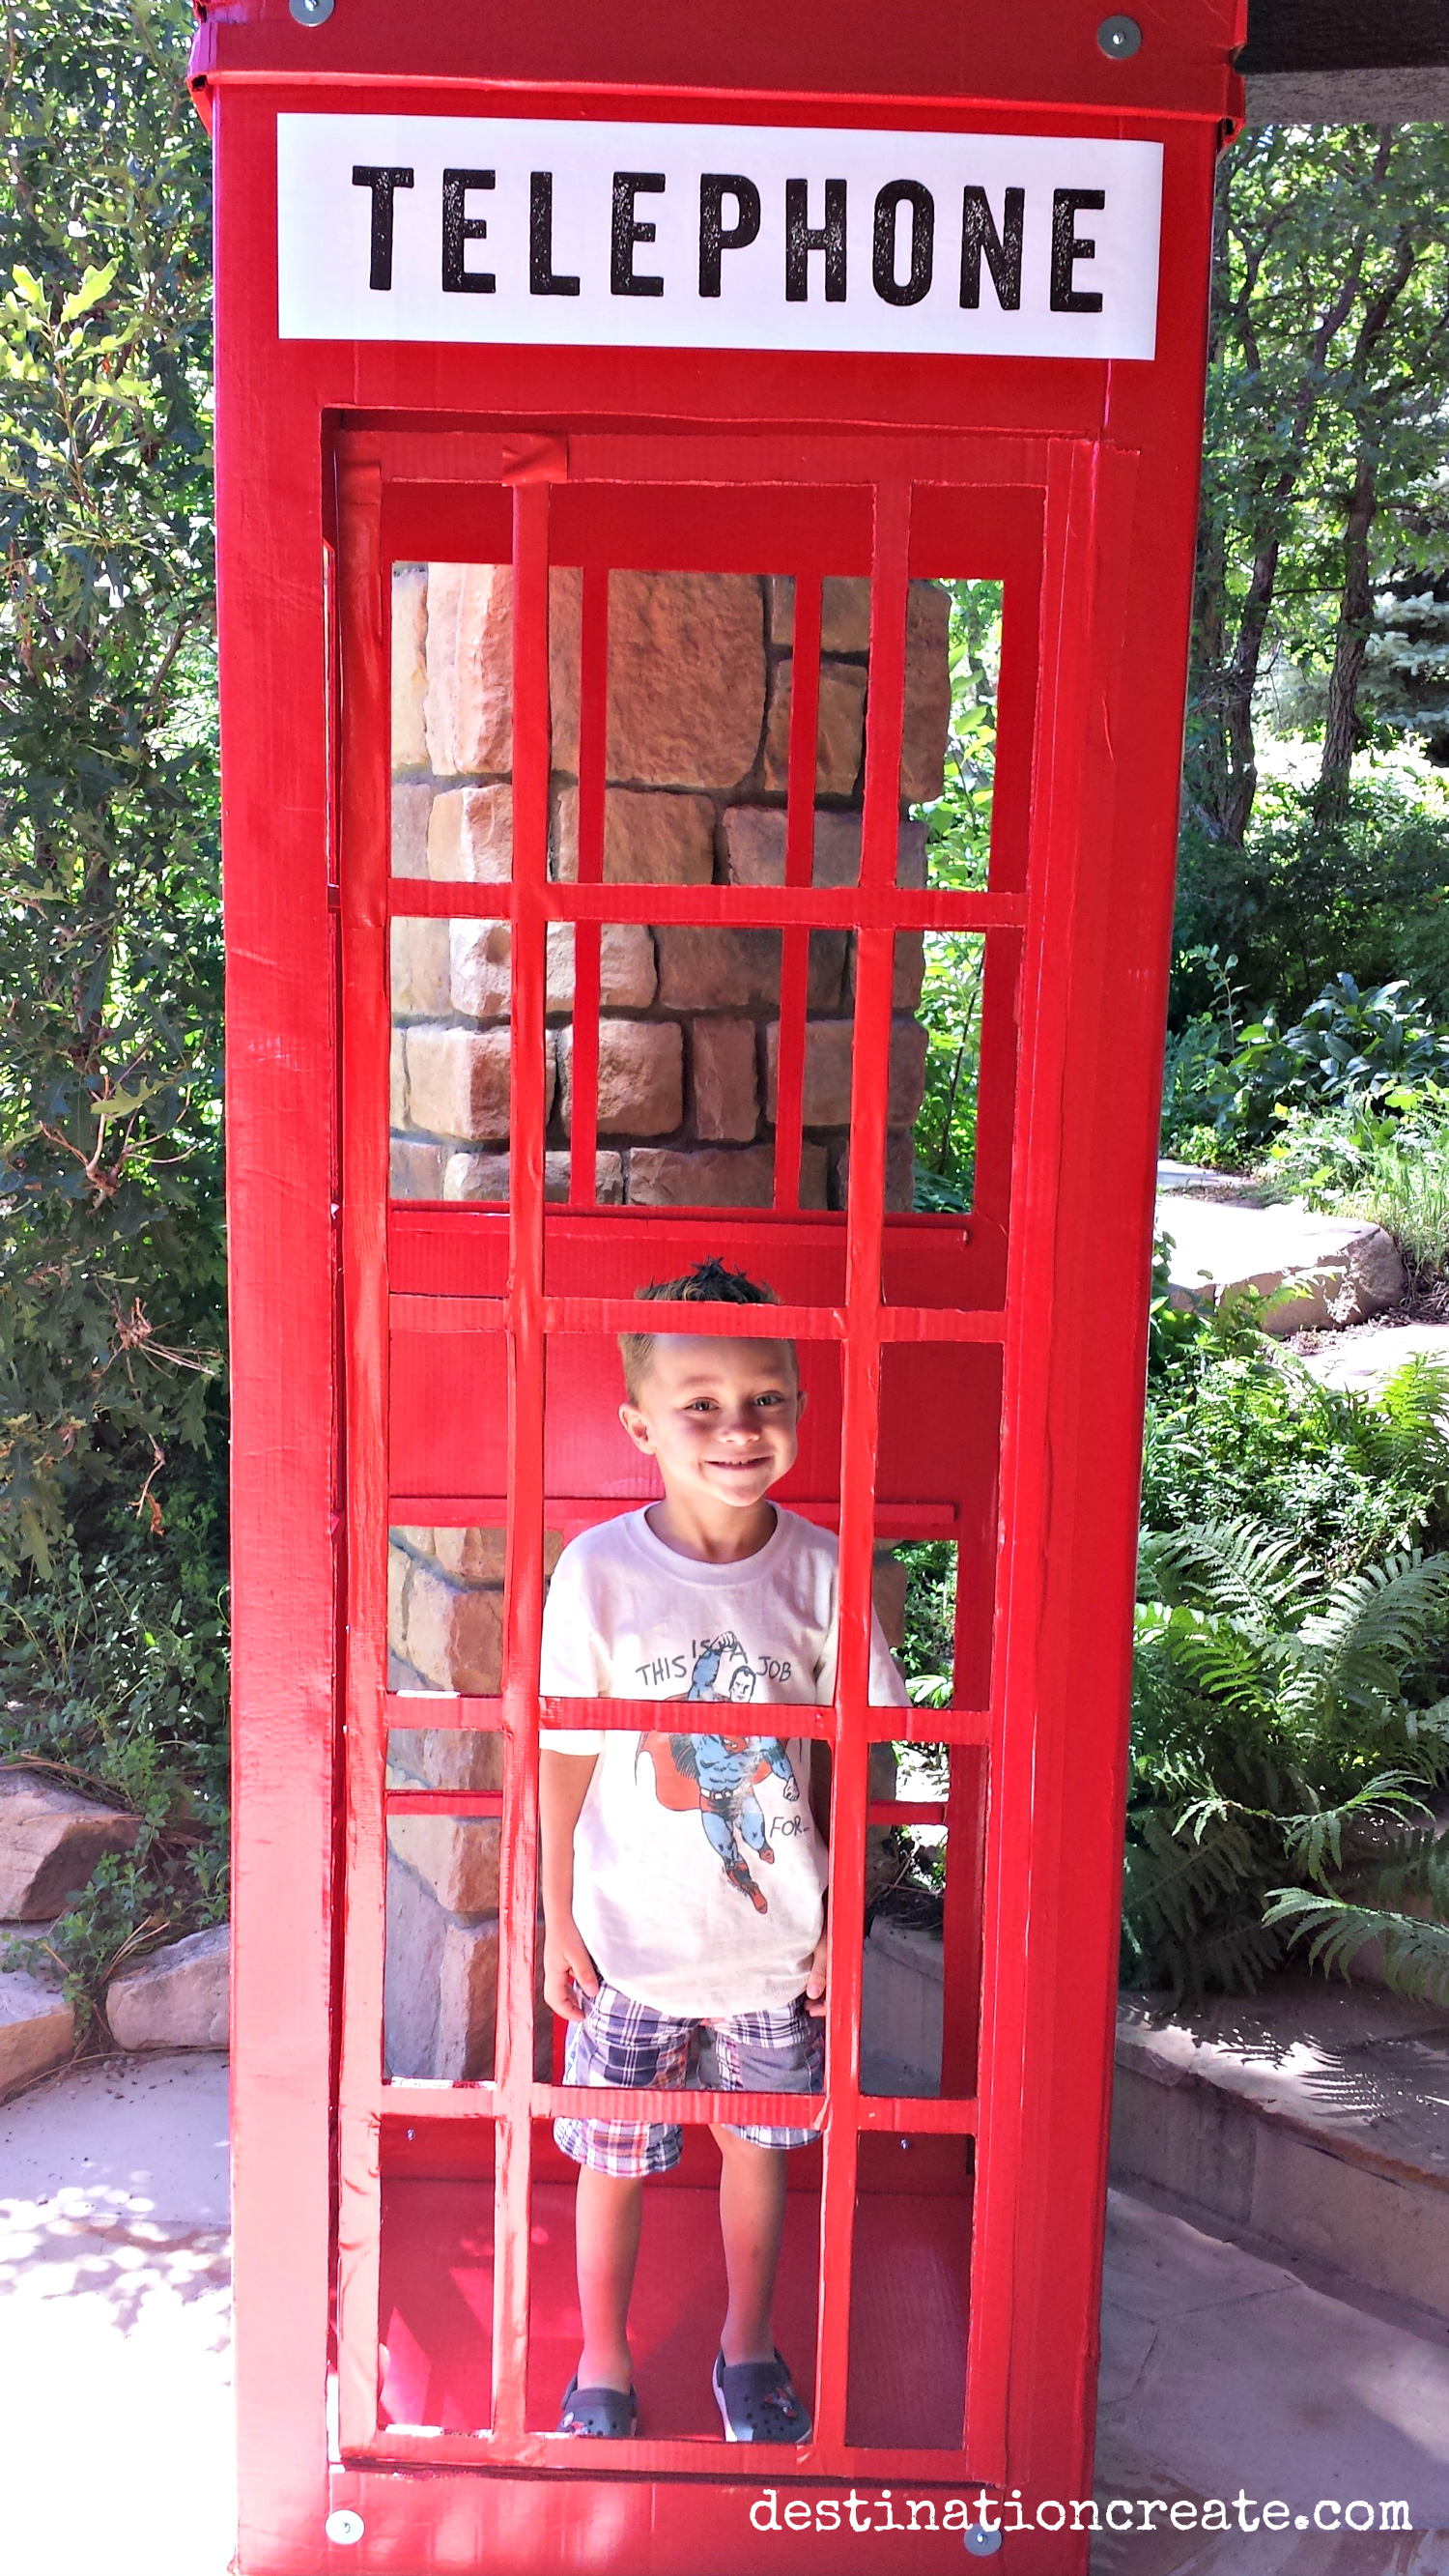 Rent this British Phone Booth for your next Super Hero or Dr. Who party.